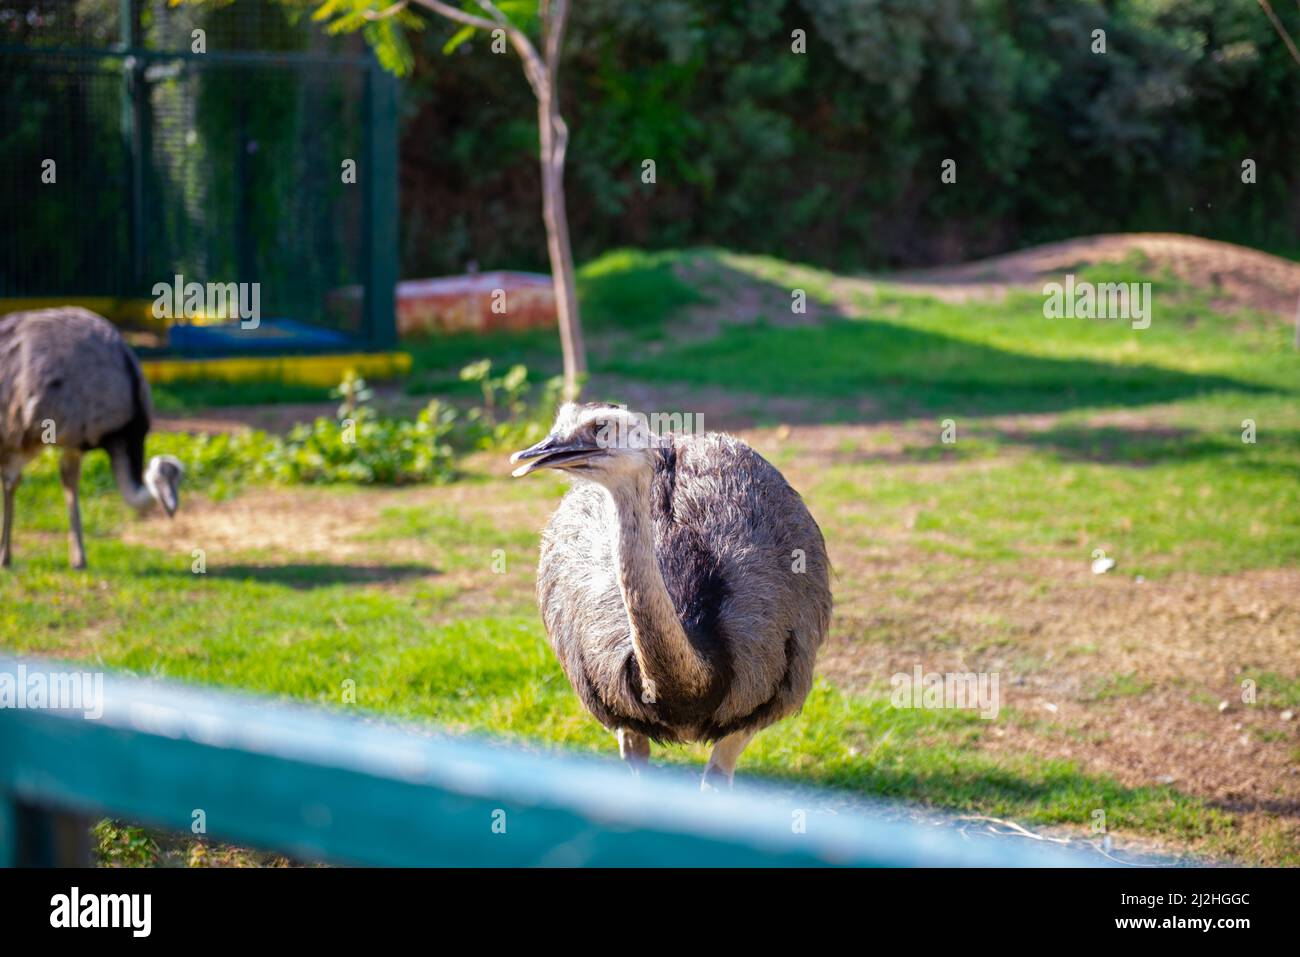 huge black ostriches live in the zoo Stock Photo